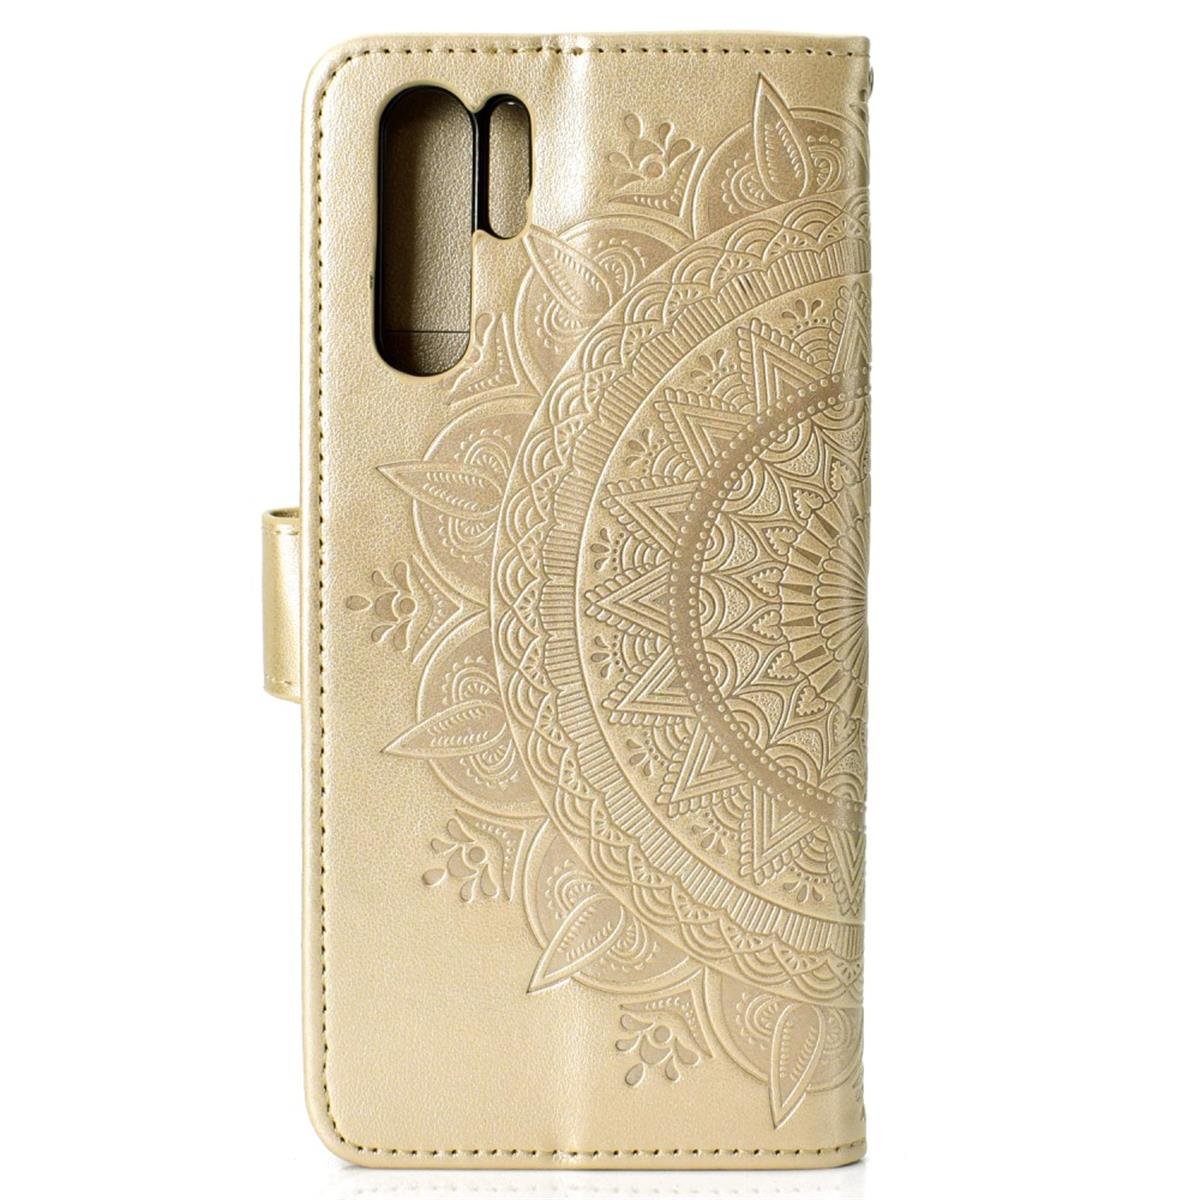 COVERKINGZ Klapphülle mit Huawei, Mandala Bookcover, Pro, P30 Muster, Gold